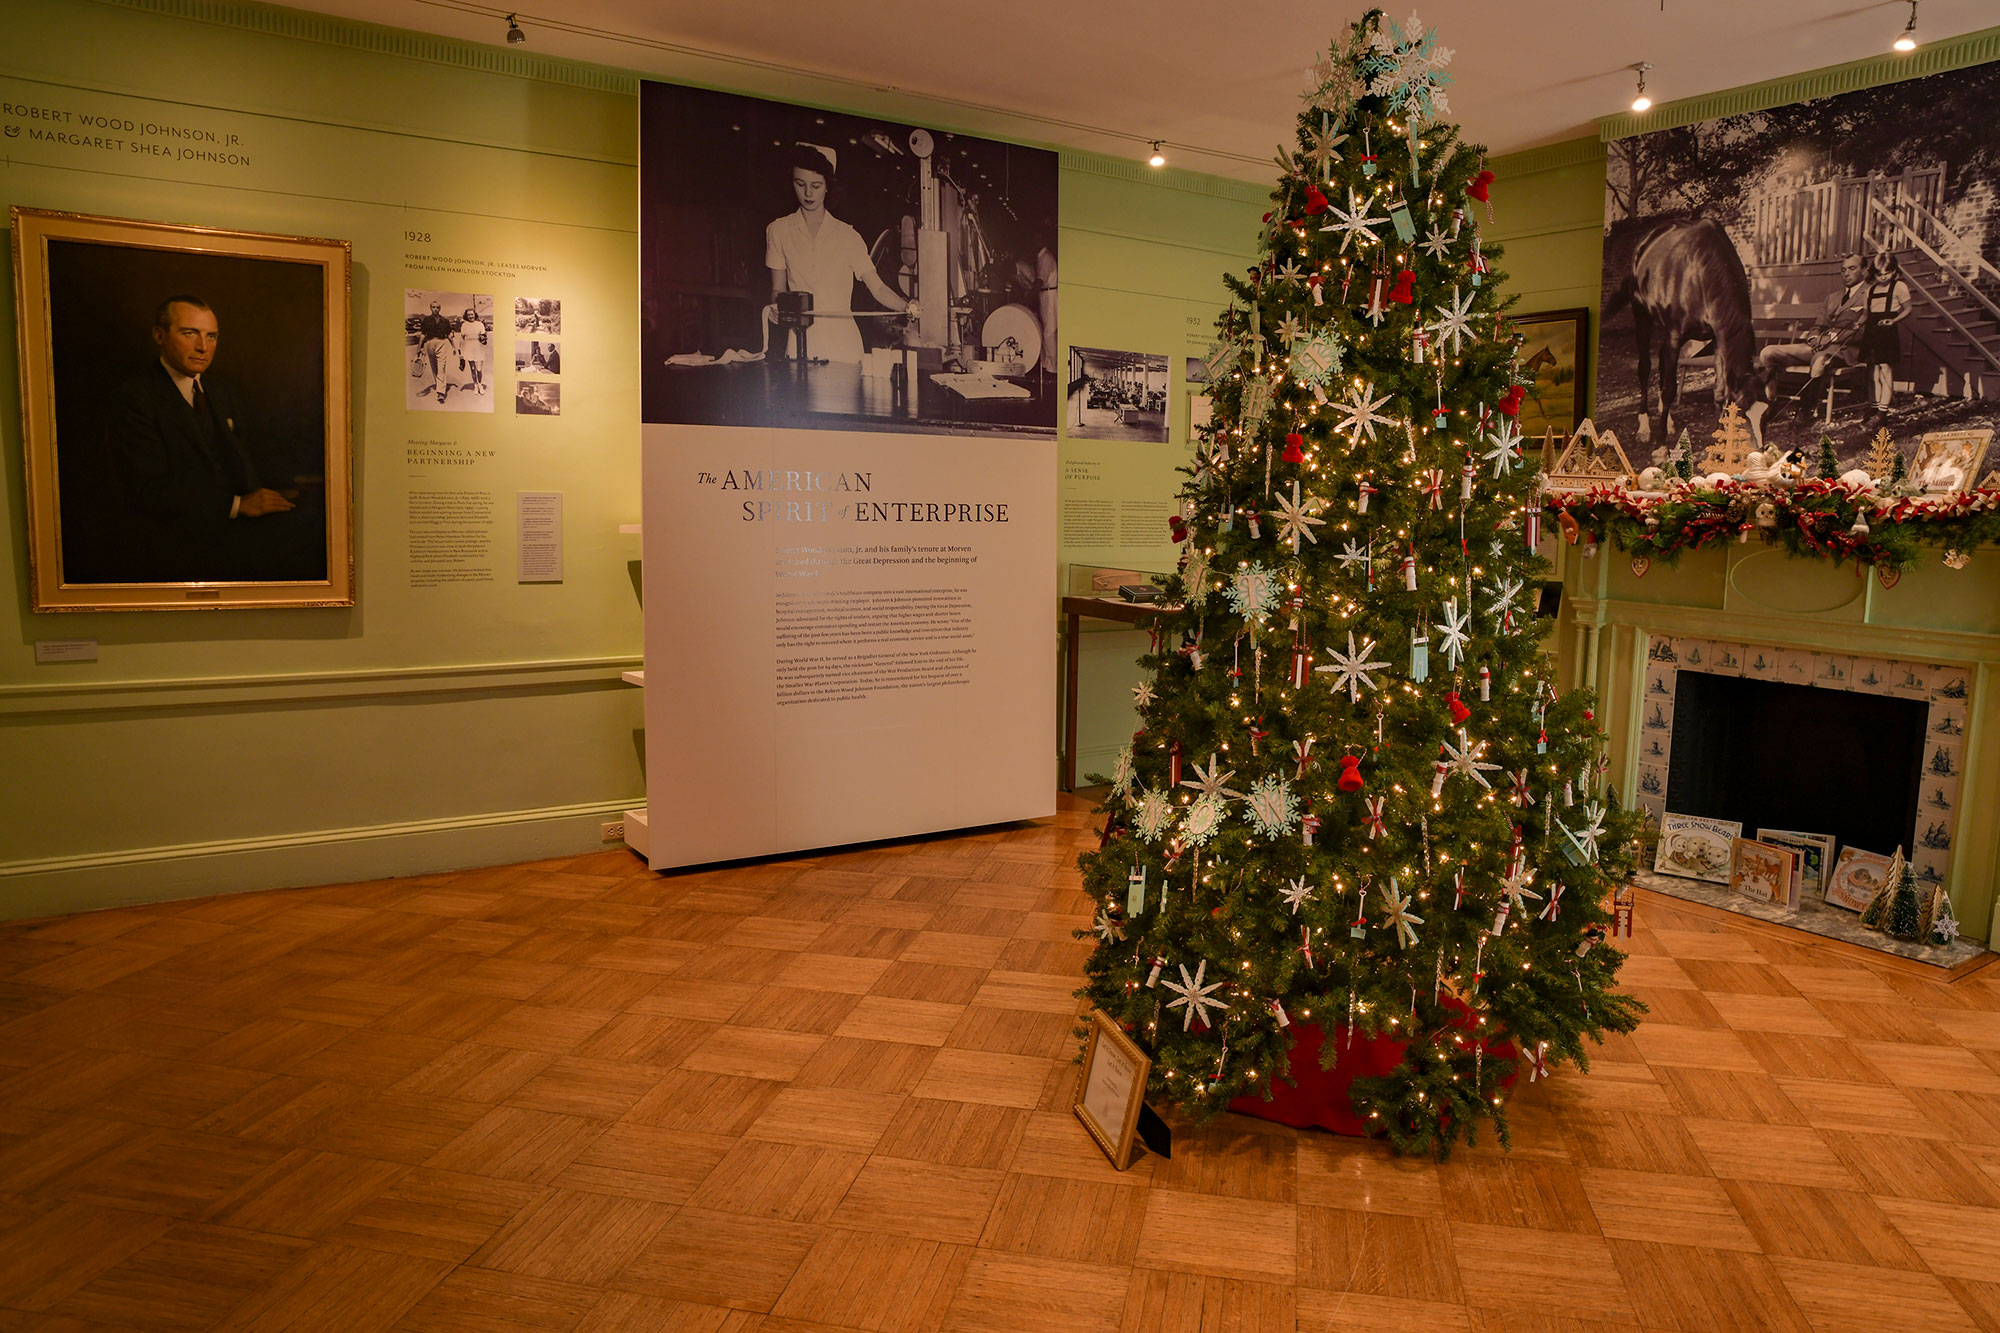 A Christmas tree in a light green room with a fireplace, biographical displays and decorated mantelpiece. The Garden Club of Princeton tree features snowflake ornaments and the mantelpiece by Princeton Public Library features books by Jan Brett.